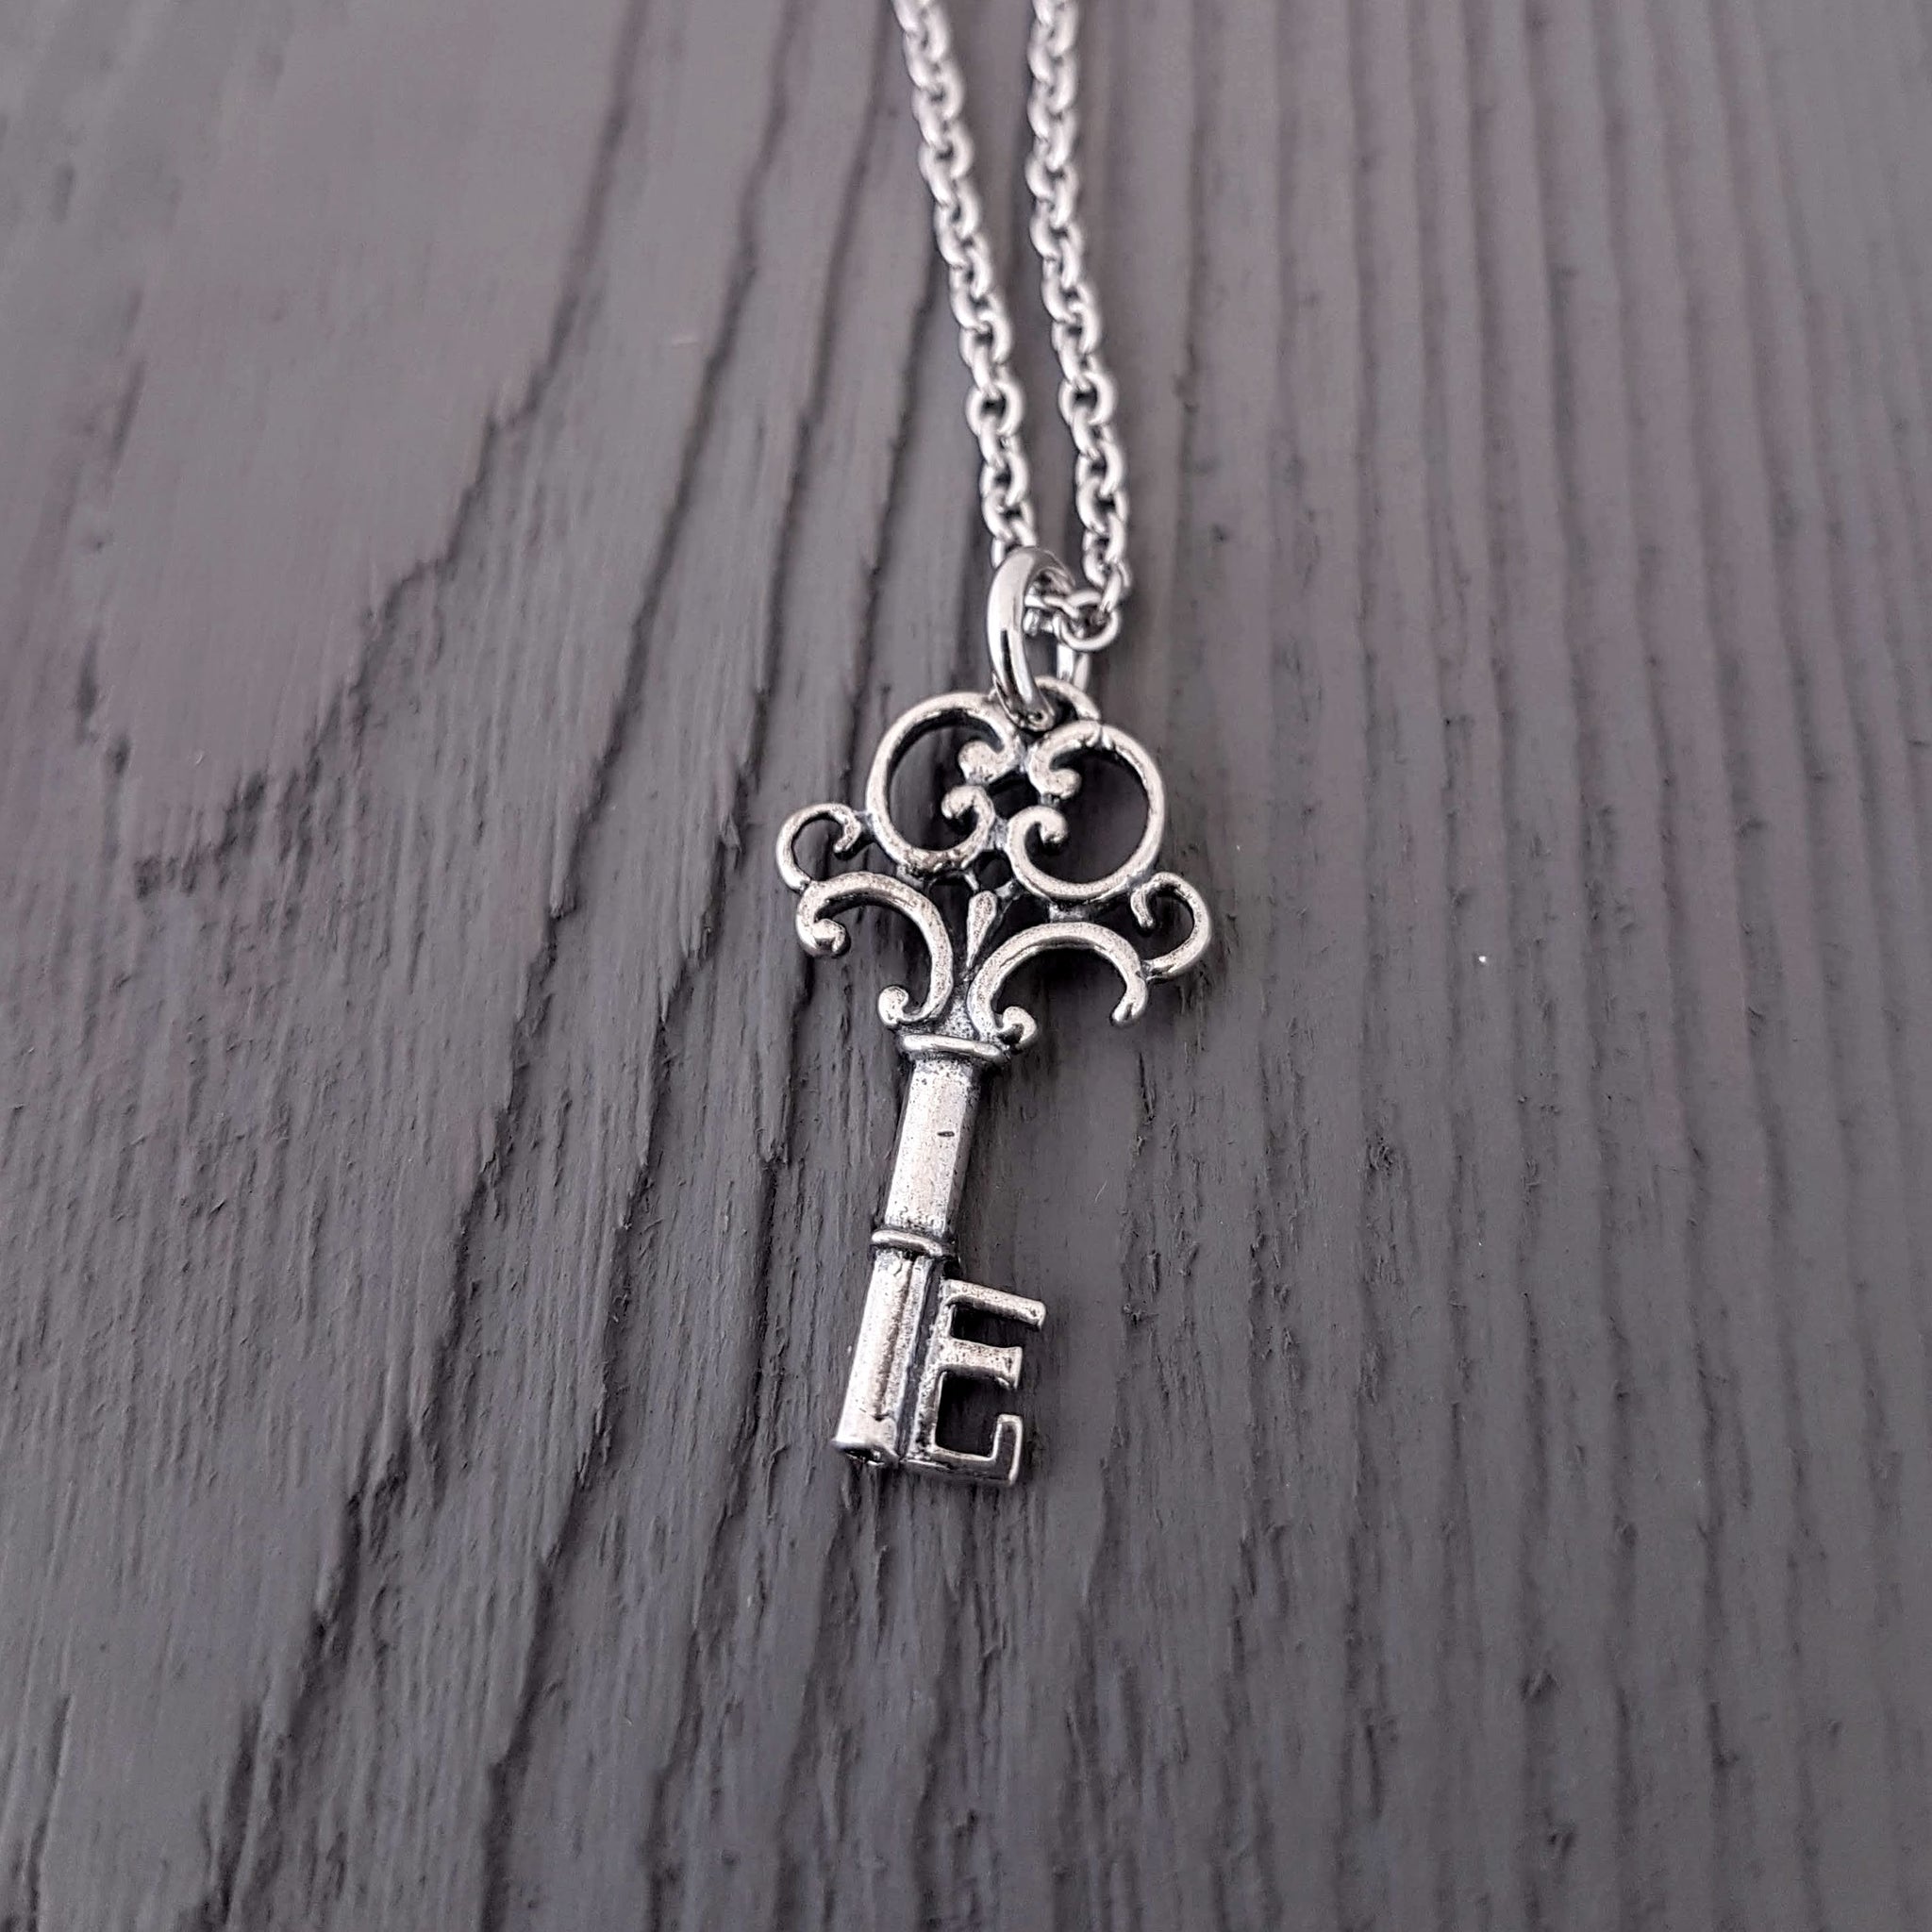 Tiny Skeleton Key Necklace - Gwen Delicious Jewelry Designs